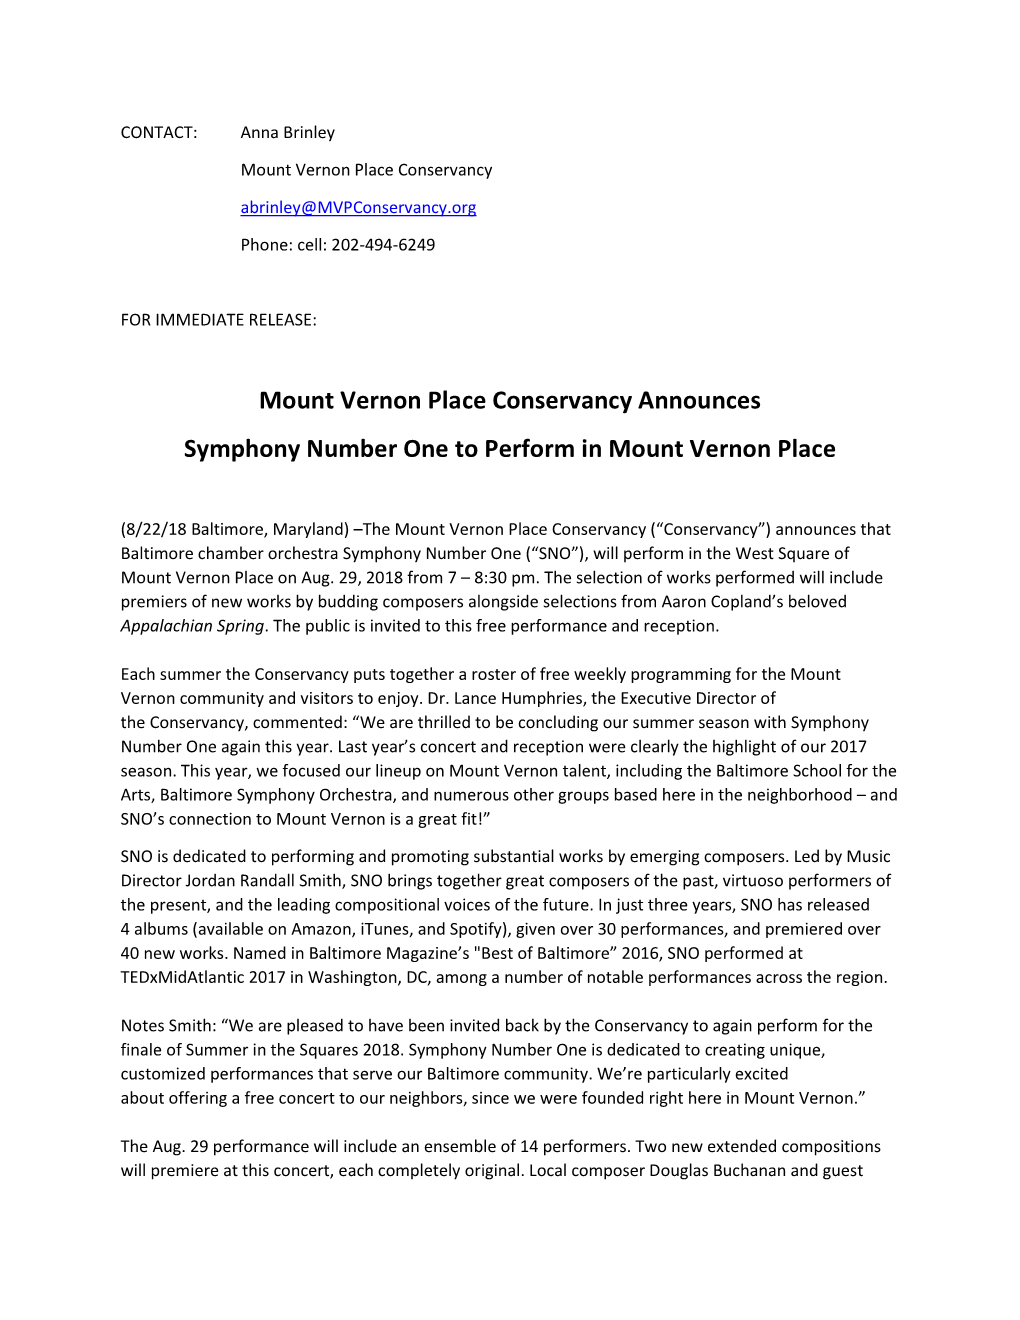 MVPC Announces Symphony Number One to Perform in Mount Vernon